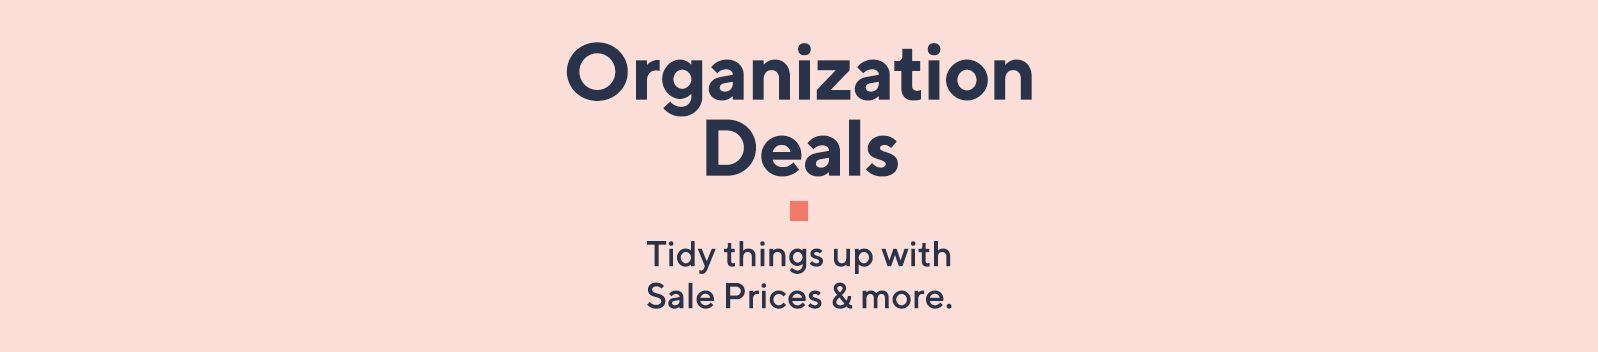 Organization Deals  Tidy things up with Sale Prices & more.